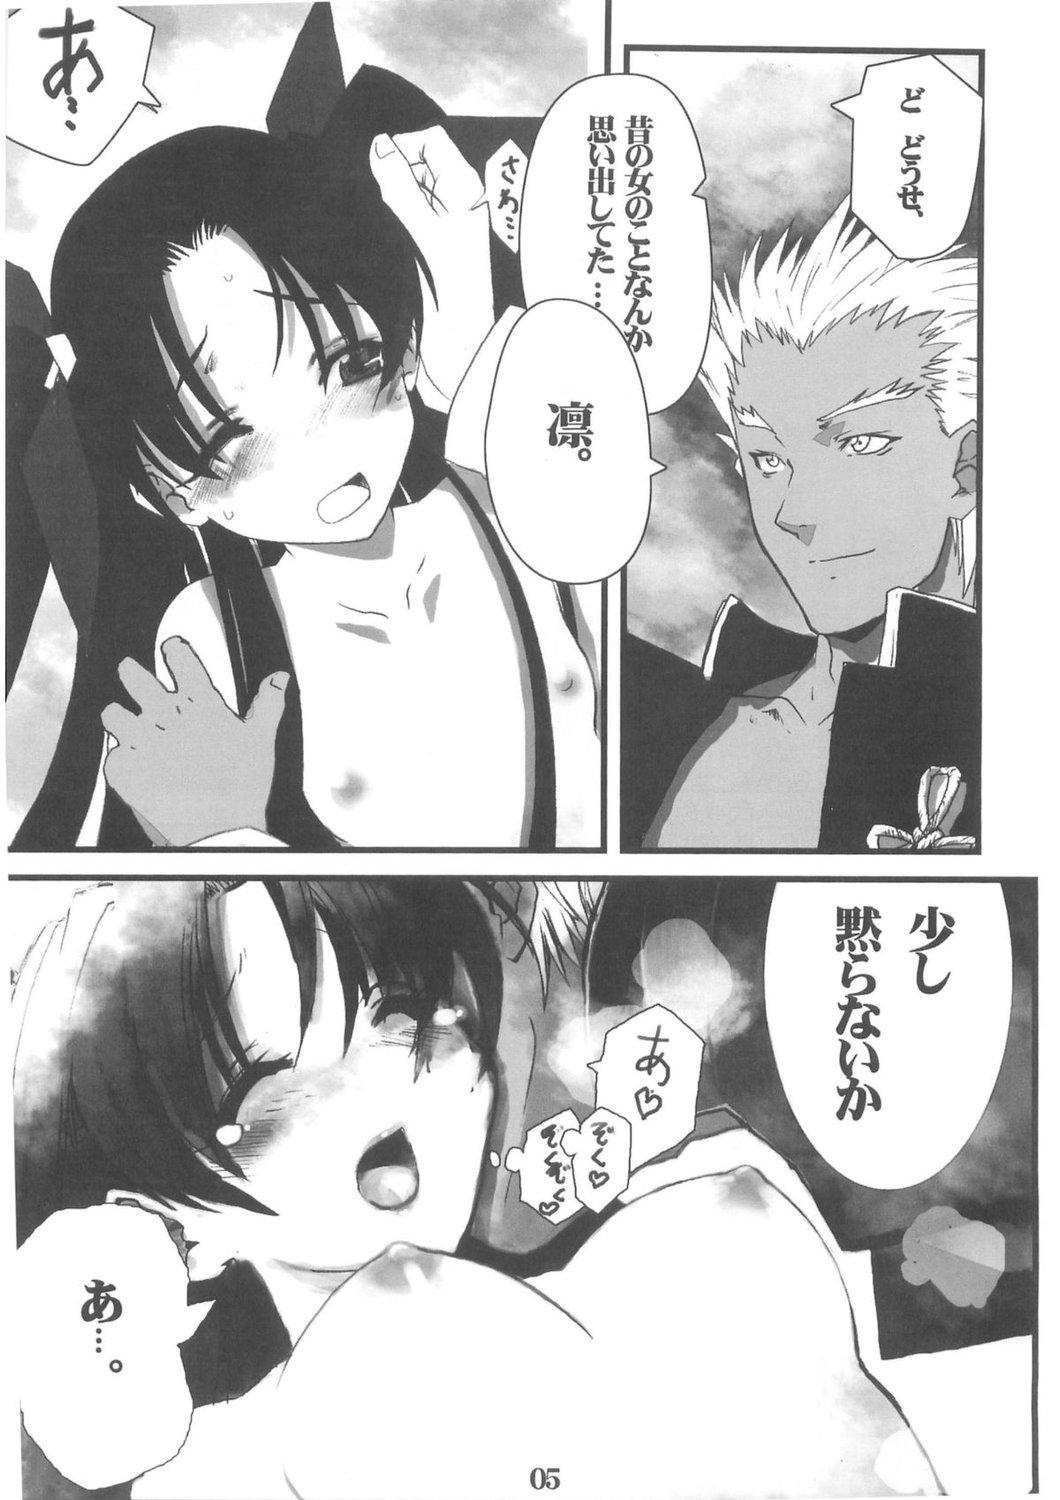 Interracial Berry Berry - Fate stay night Punished - Page 5